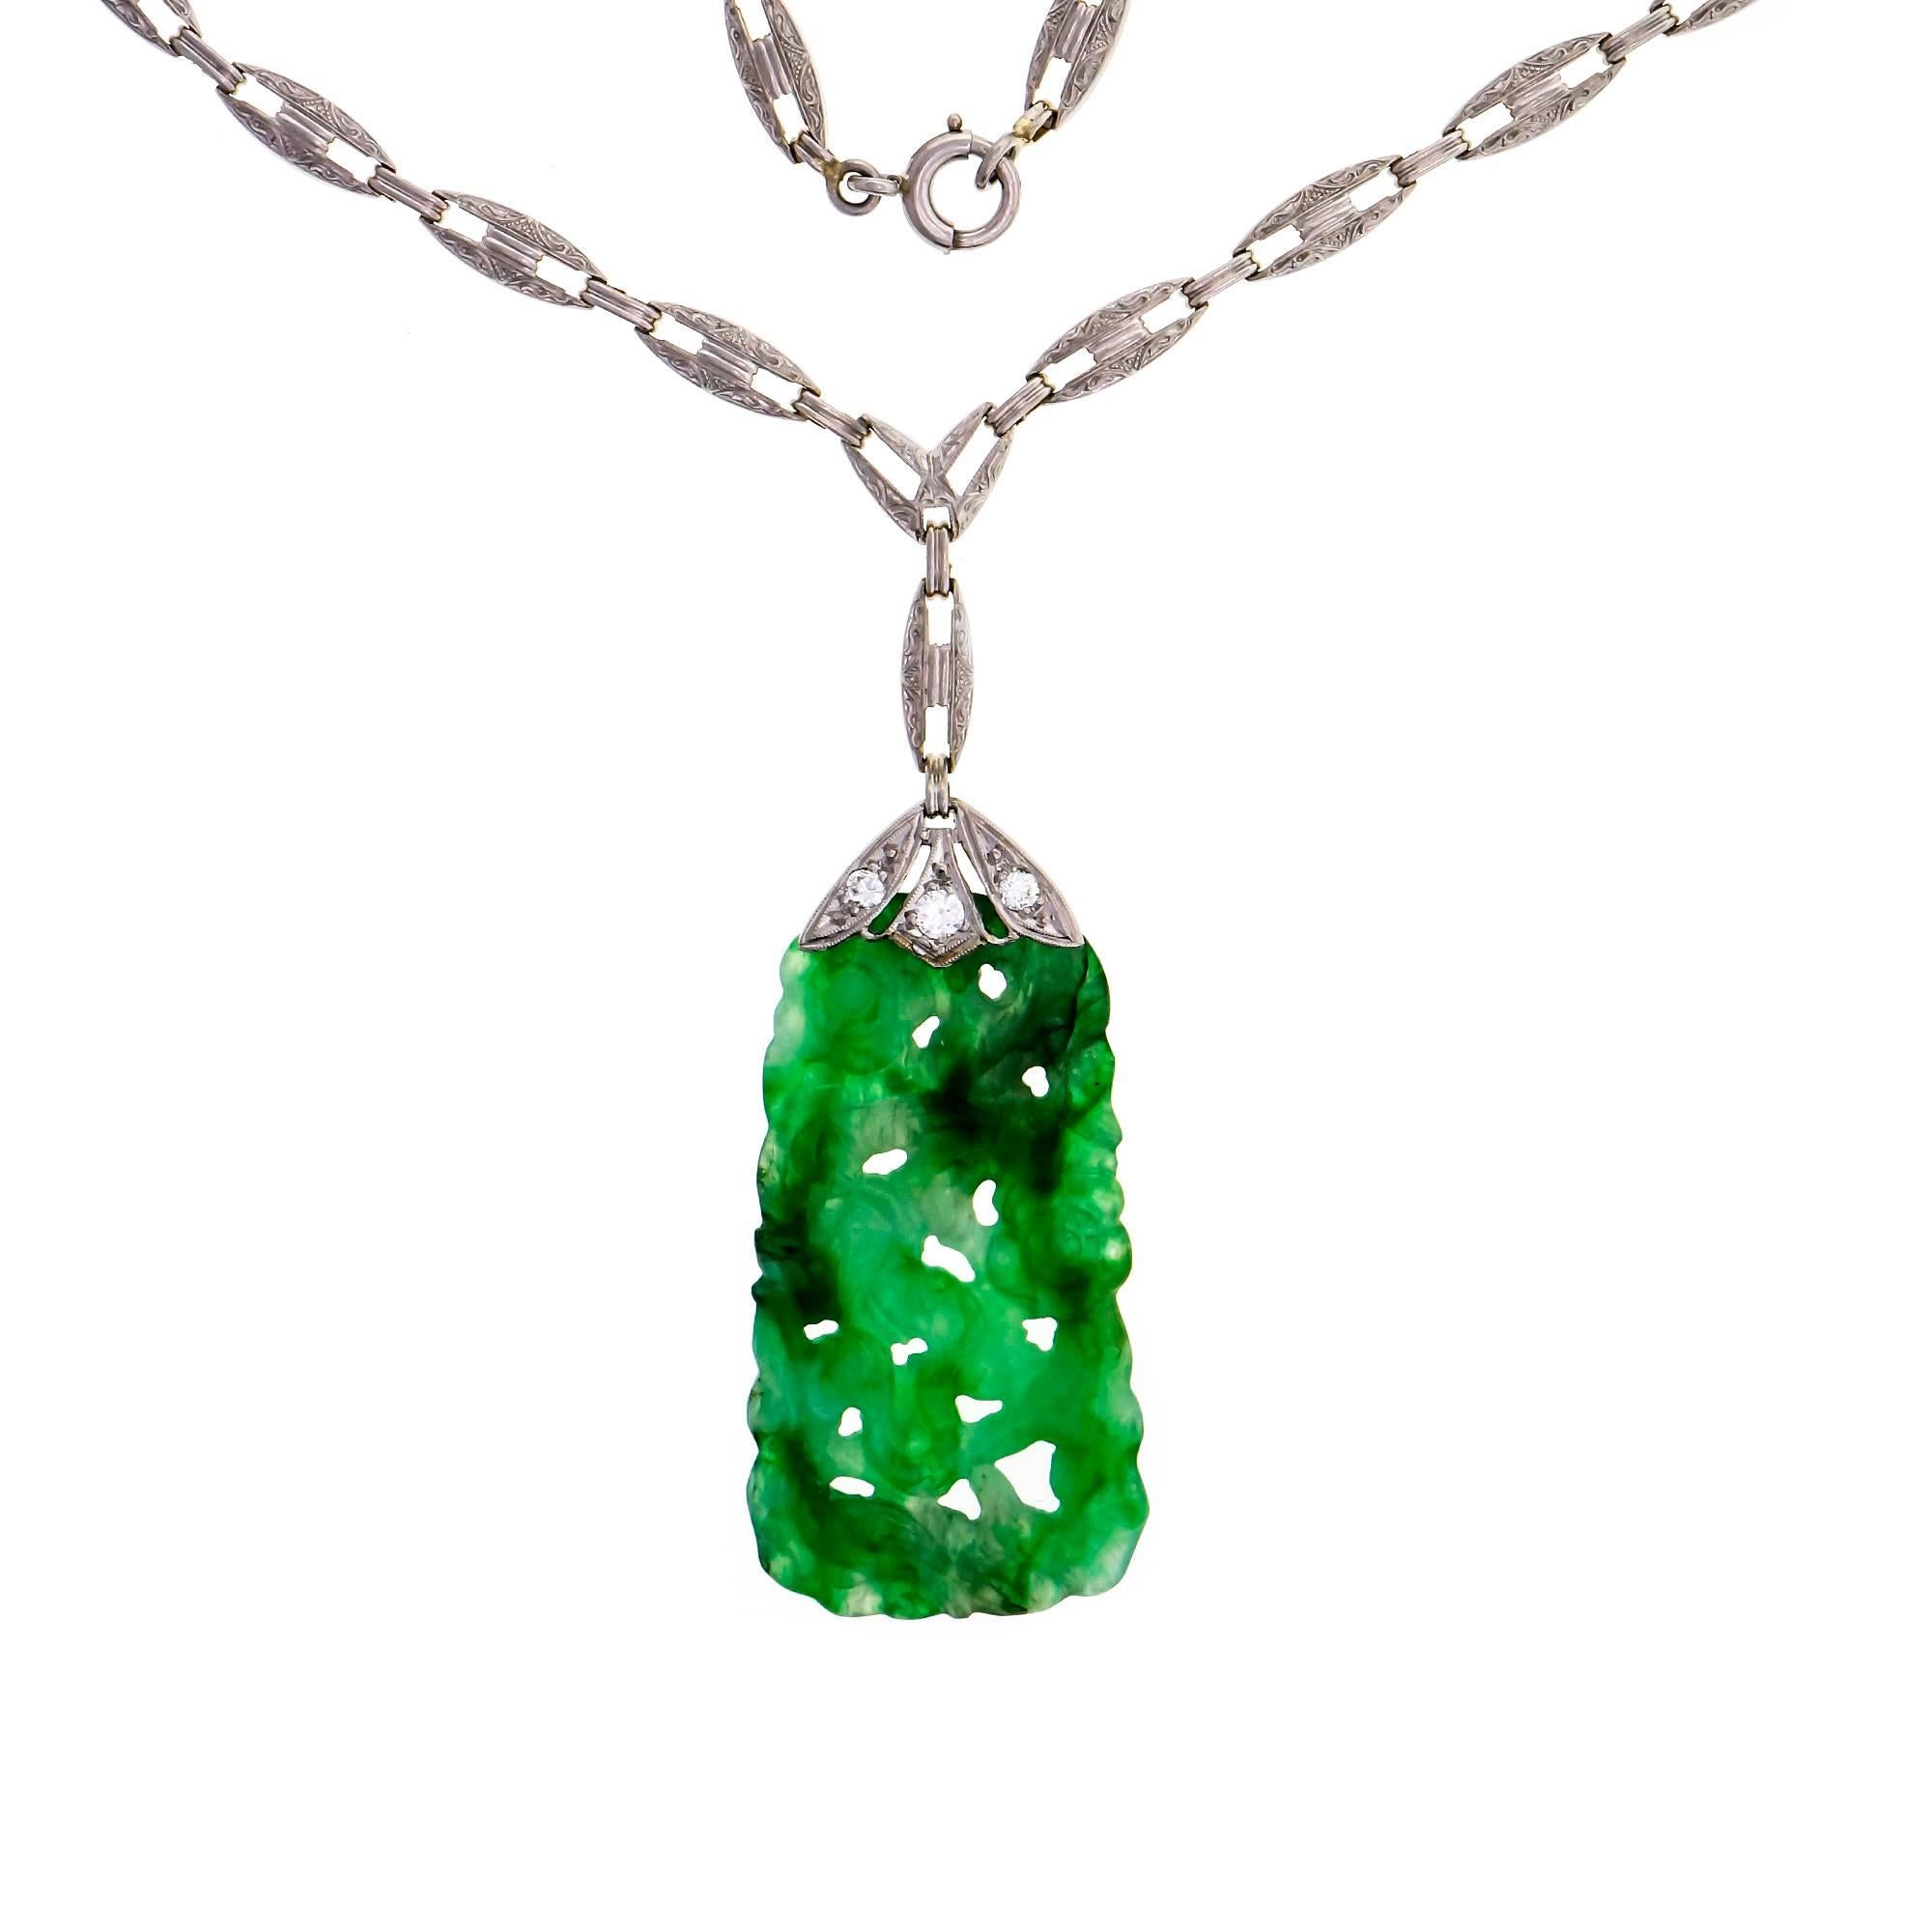 Handmade jadeite jade diamond pendant necklace.  vintage 1930 necklace with Platinum top over 14k yellow gold with handmade Platinum top link chain and Platinum link separators and spring ring. The center is a highly translucent natural Jadeite Jade